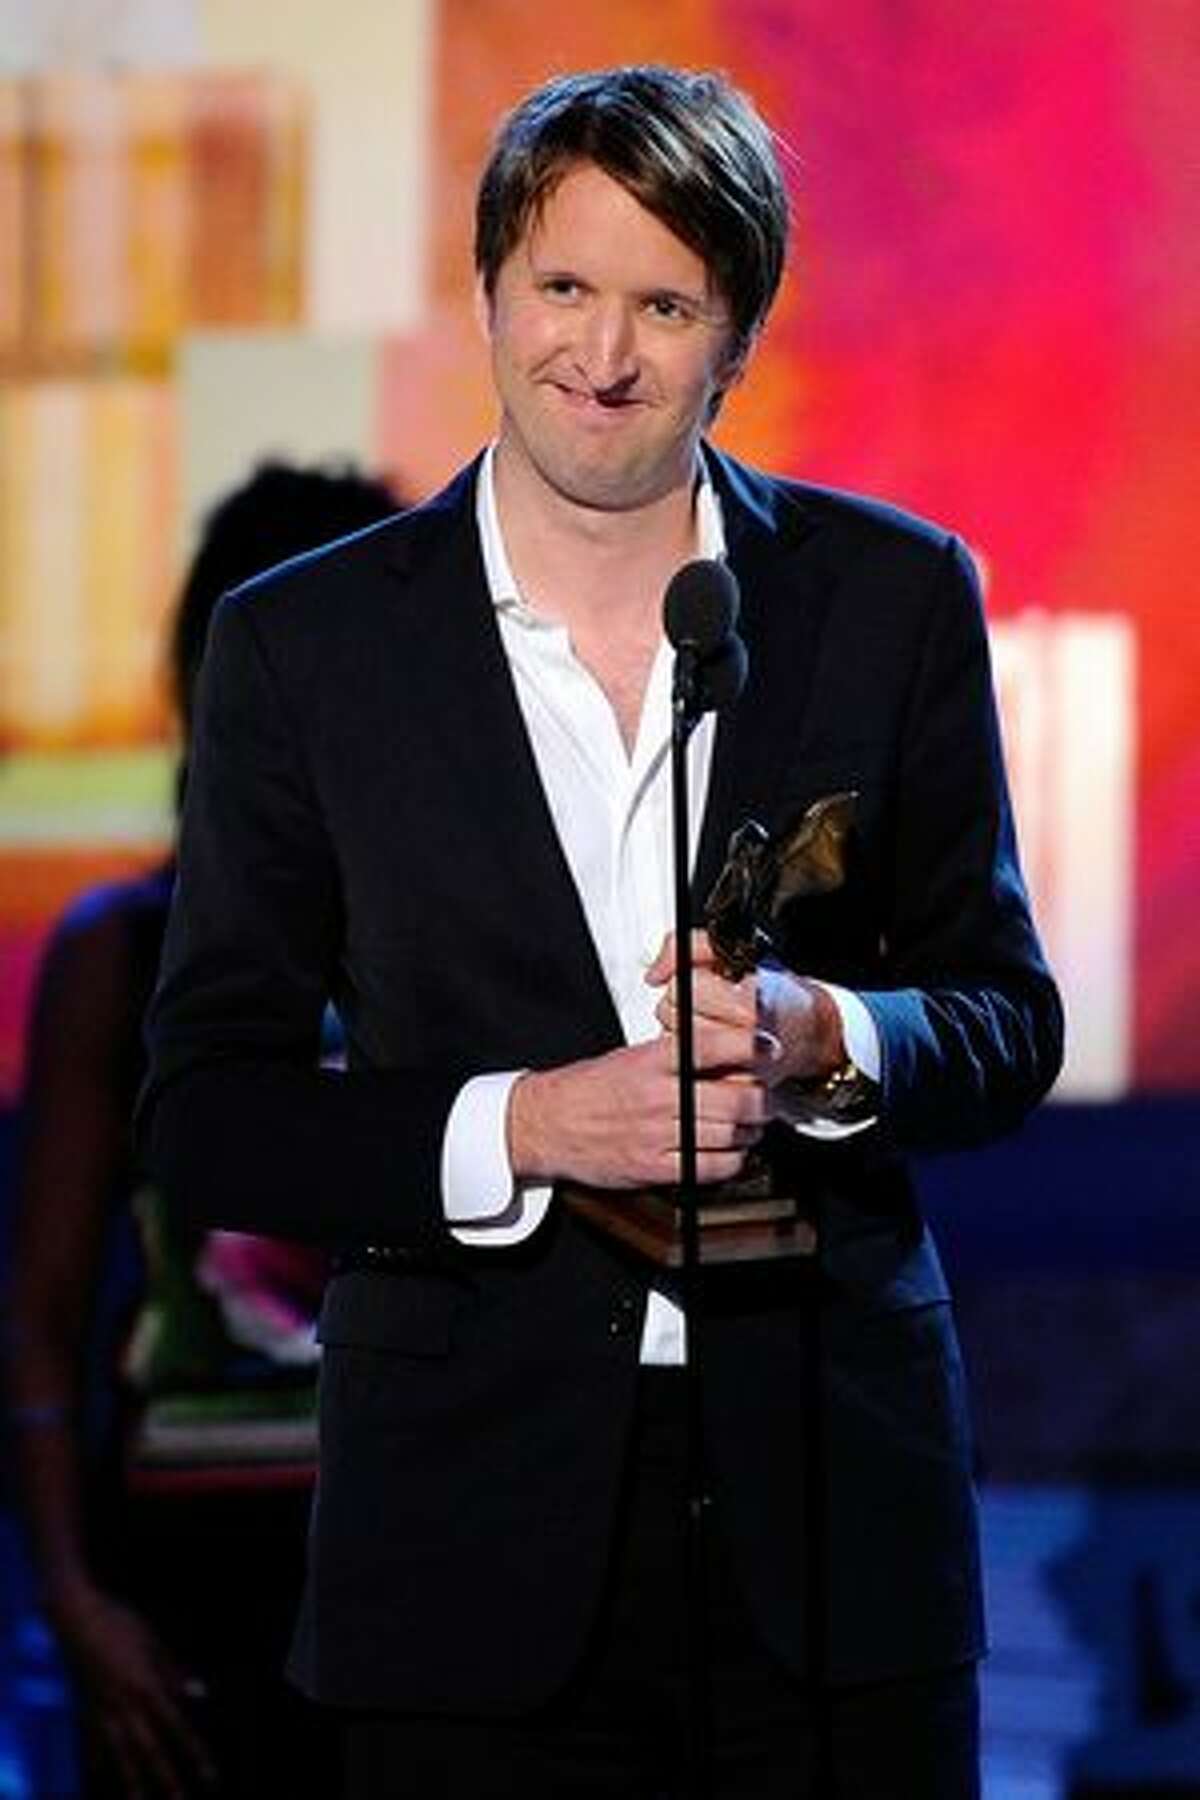 Director Tom Hooper, winner of Best Foreign Film award for 'The King's Speech,' accepts award onstage.